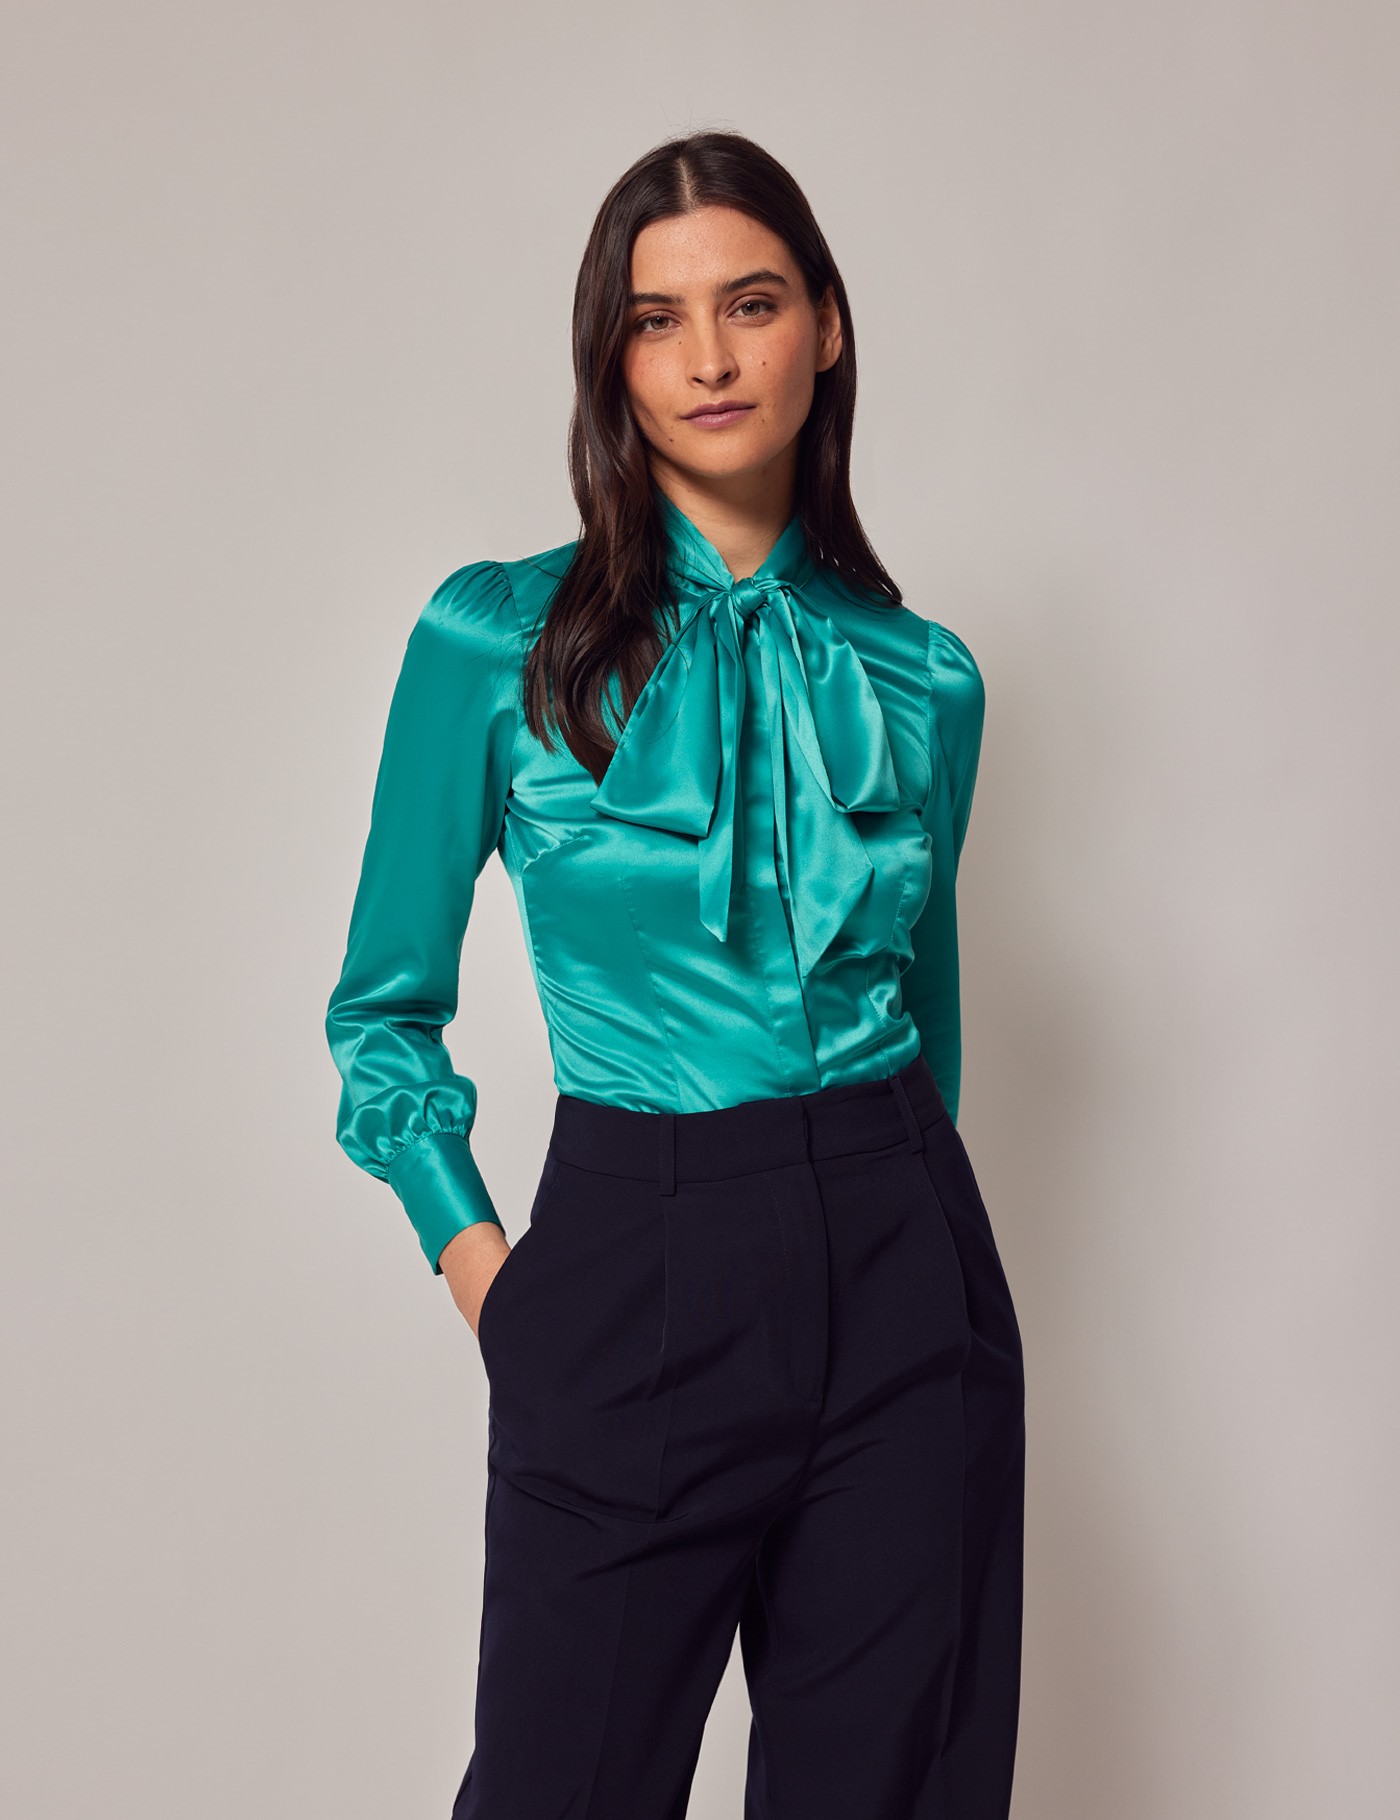 Women's Teal Pussybow Blouse